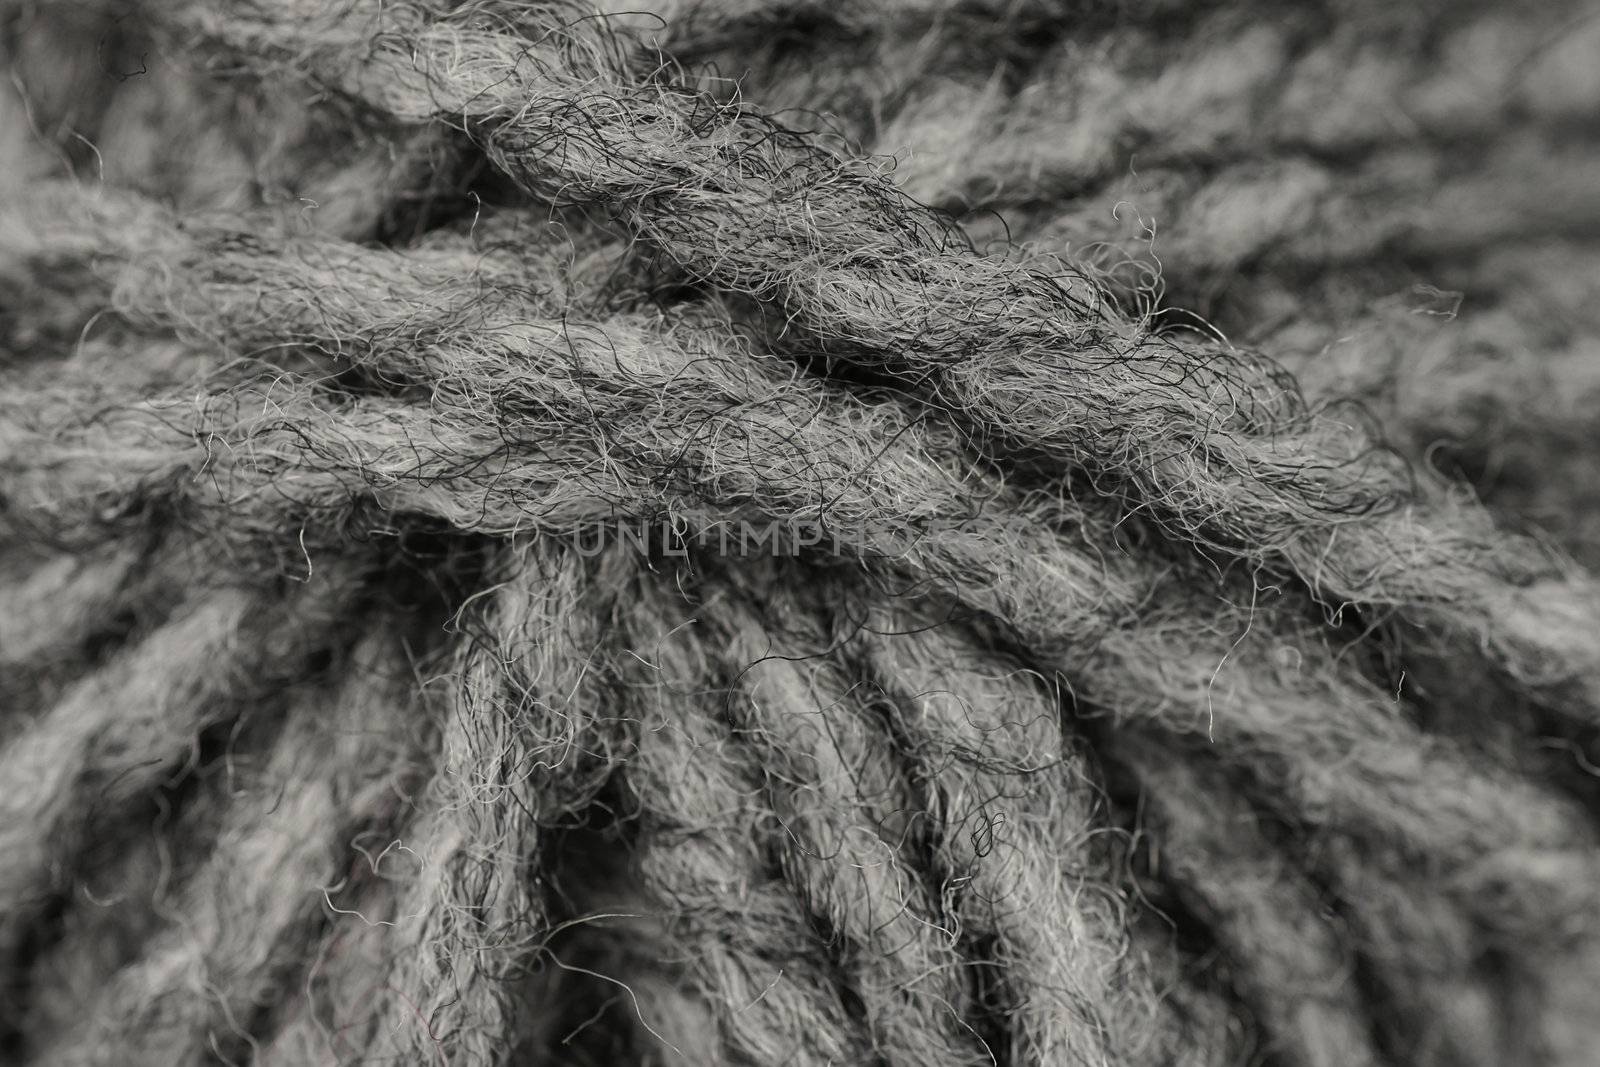 Macro shot of ball of orange wool or yarn, great arts and crafts or texture abstract background.